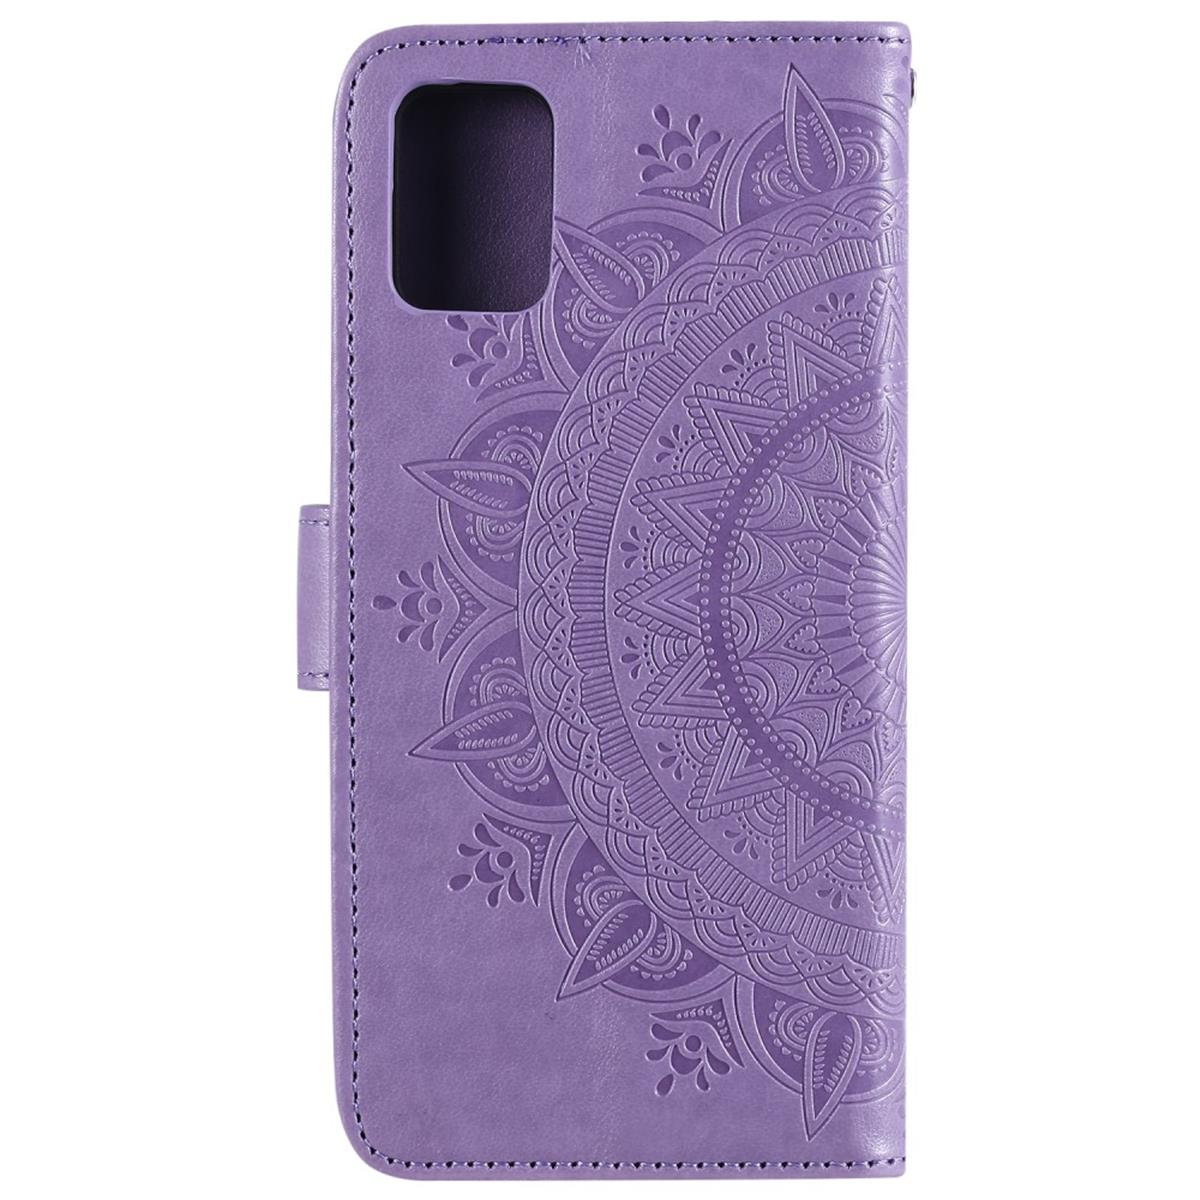 mit COVERKINGZ Klapphülle Muster, Galaxy Lila Bookcover, Note20, Samsung, Mandala